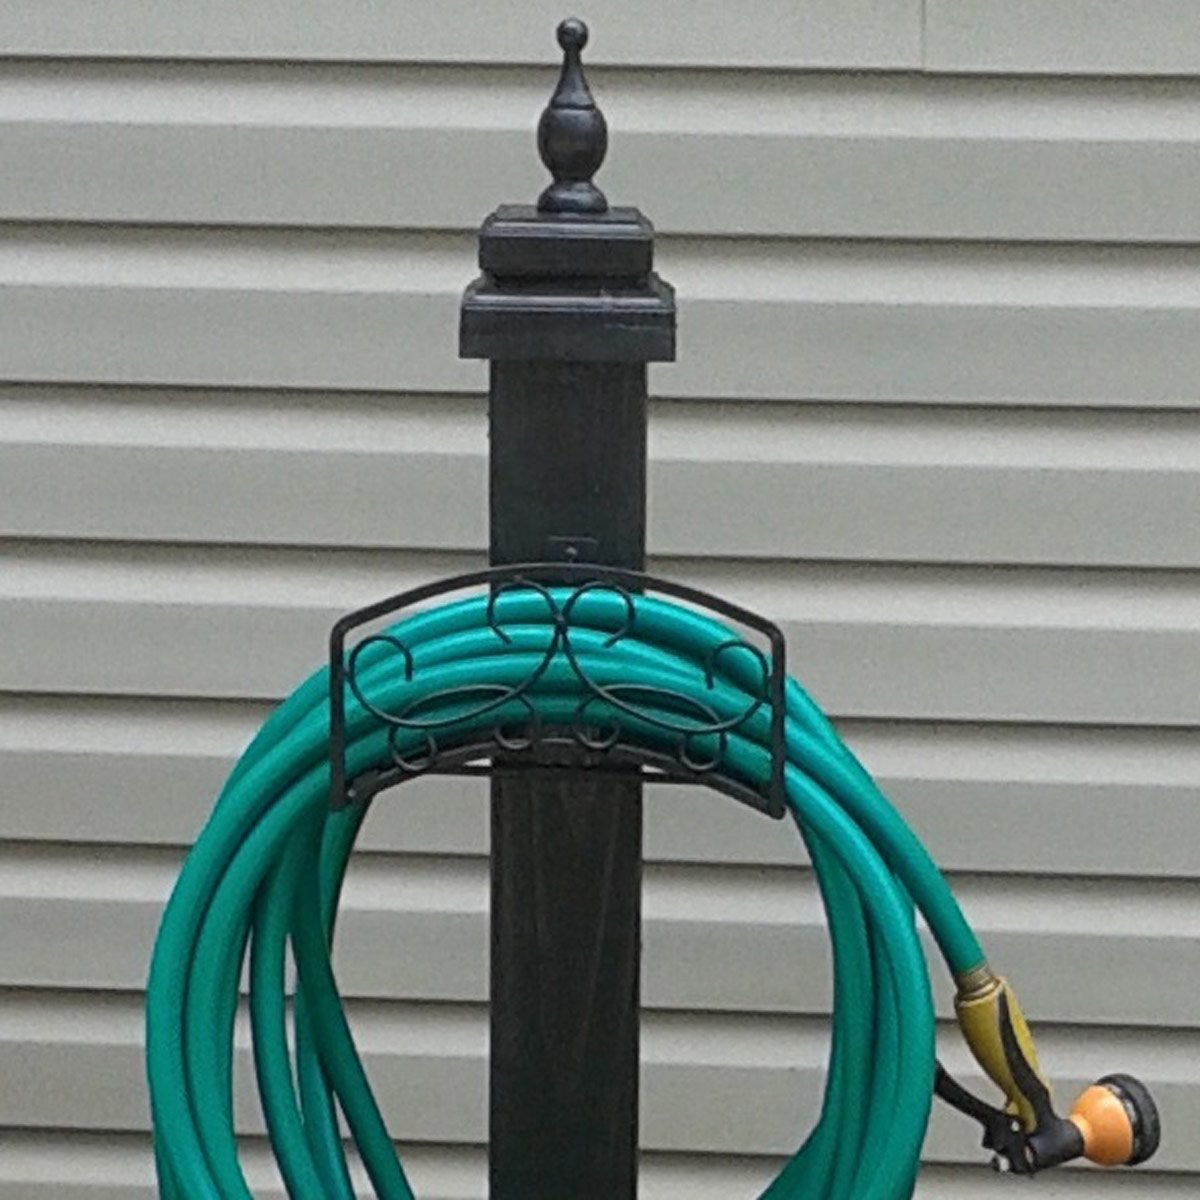 How to Make Your Own Holder for Garden Hose Storage